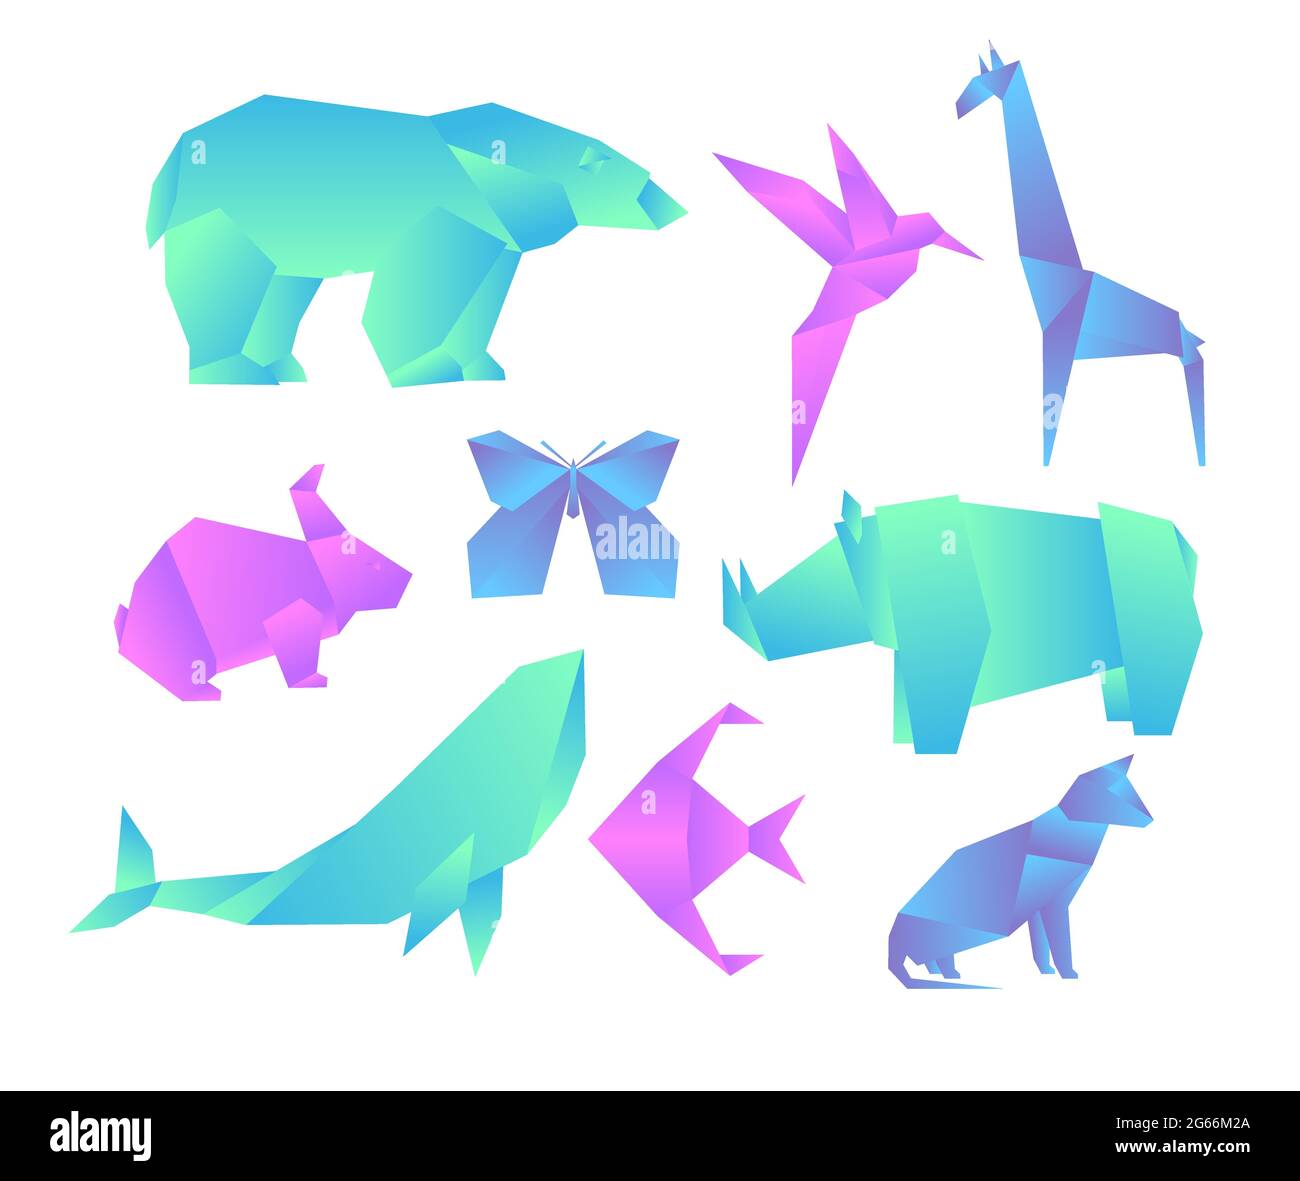 Vector illustration set of geometric paper animals with color gradient, 3d animals, origami style. Origami gradient animals collection isolated on Stock Vector